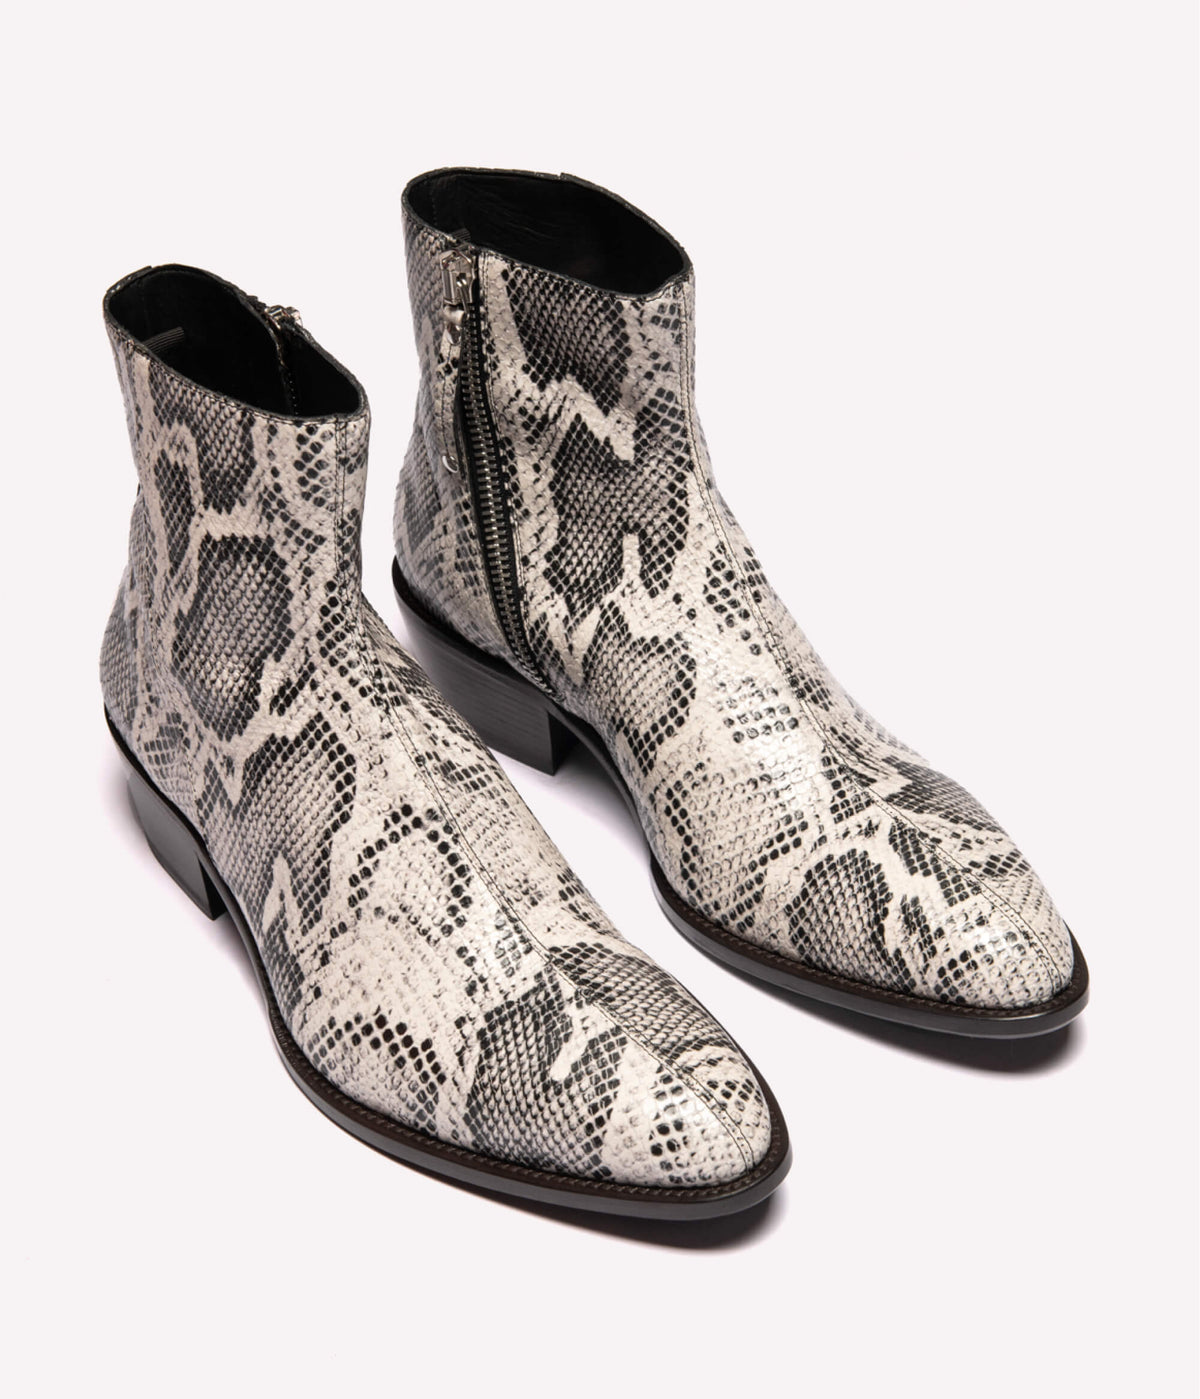 HUMAN RECREATIONAL SERVICES LUTHER BOOT IN WHITE SNAKE PRINT ITALIAN LEATHER